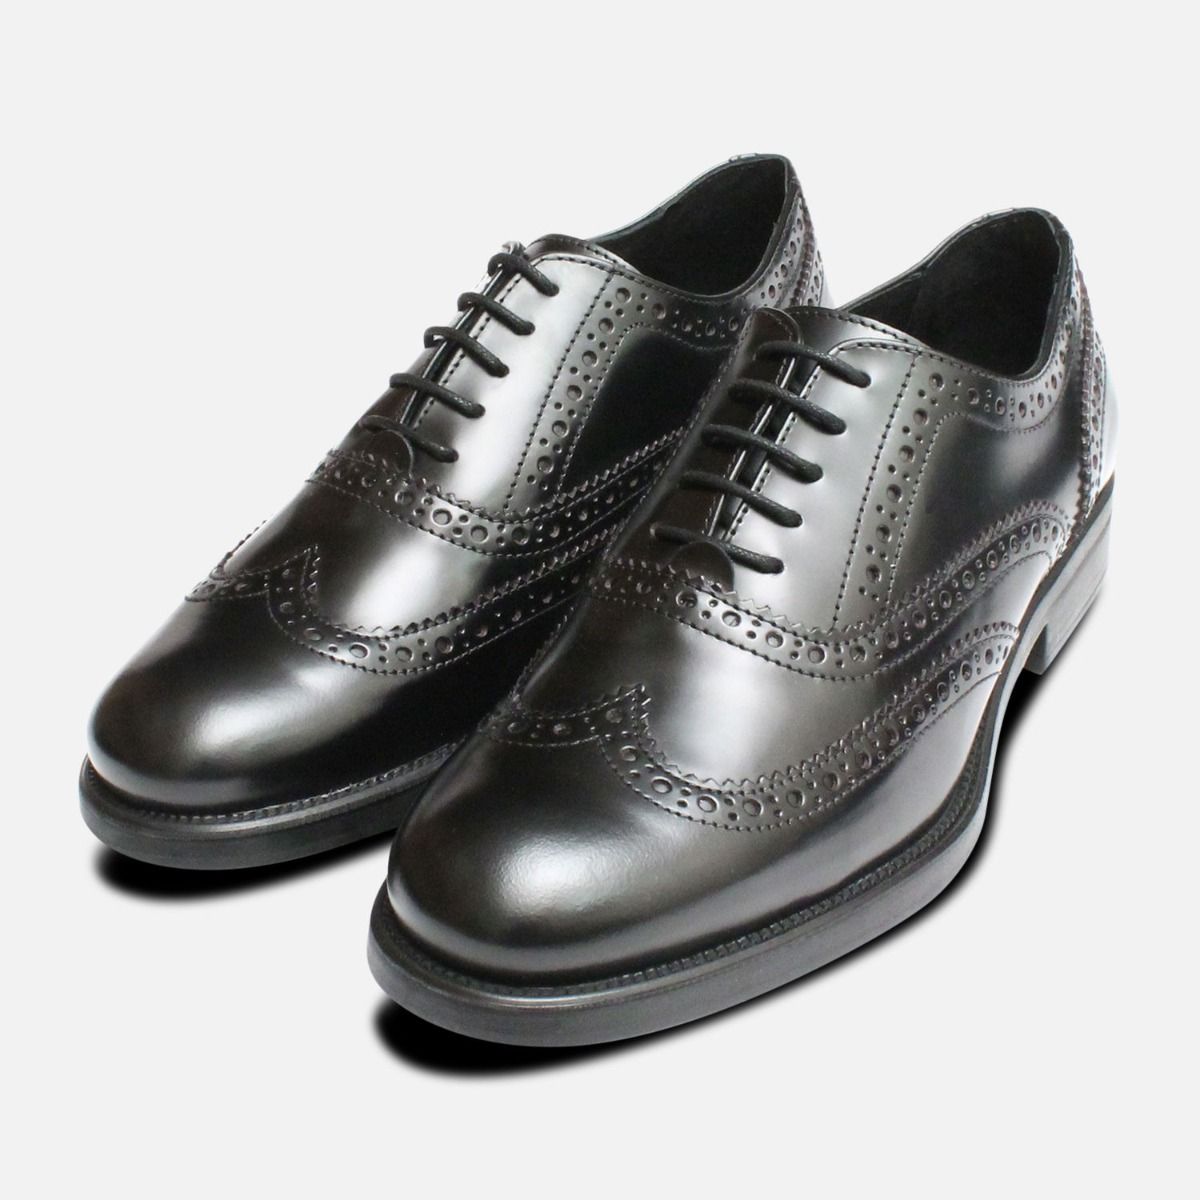 Black Oxford Rubber Sole Brogues Made 